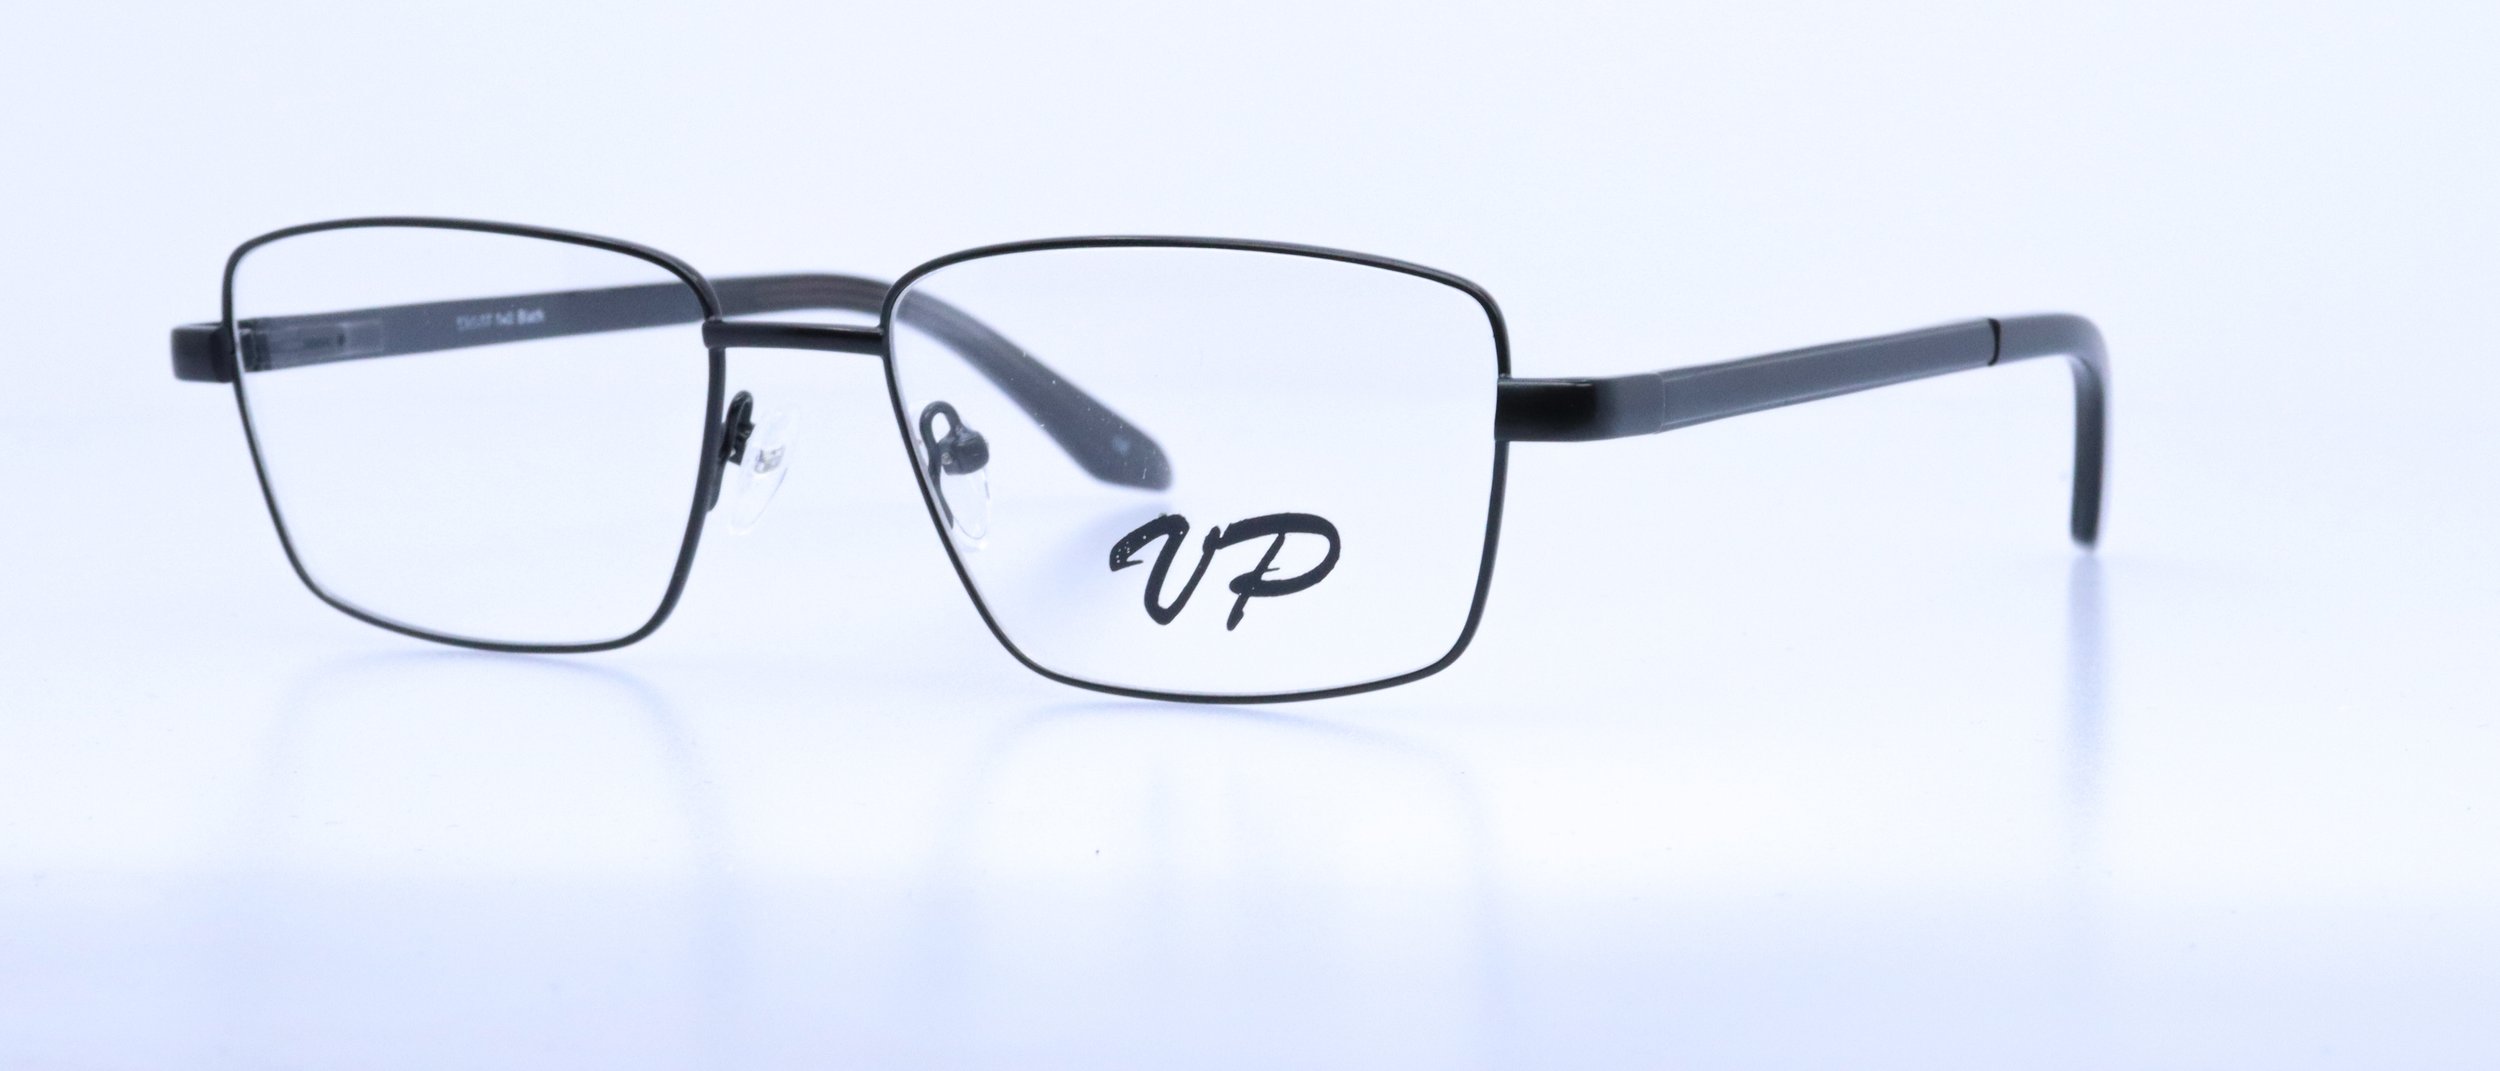  NEW!! VP164: 53-17-140, Available in Black or Brown 